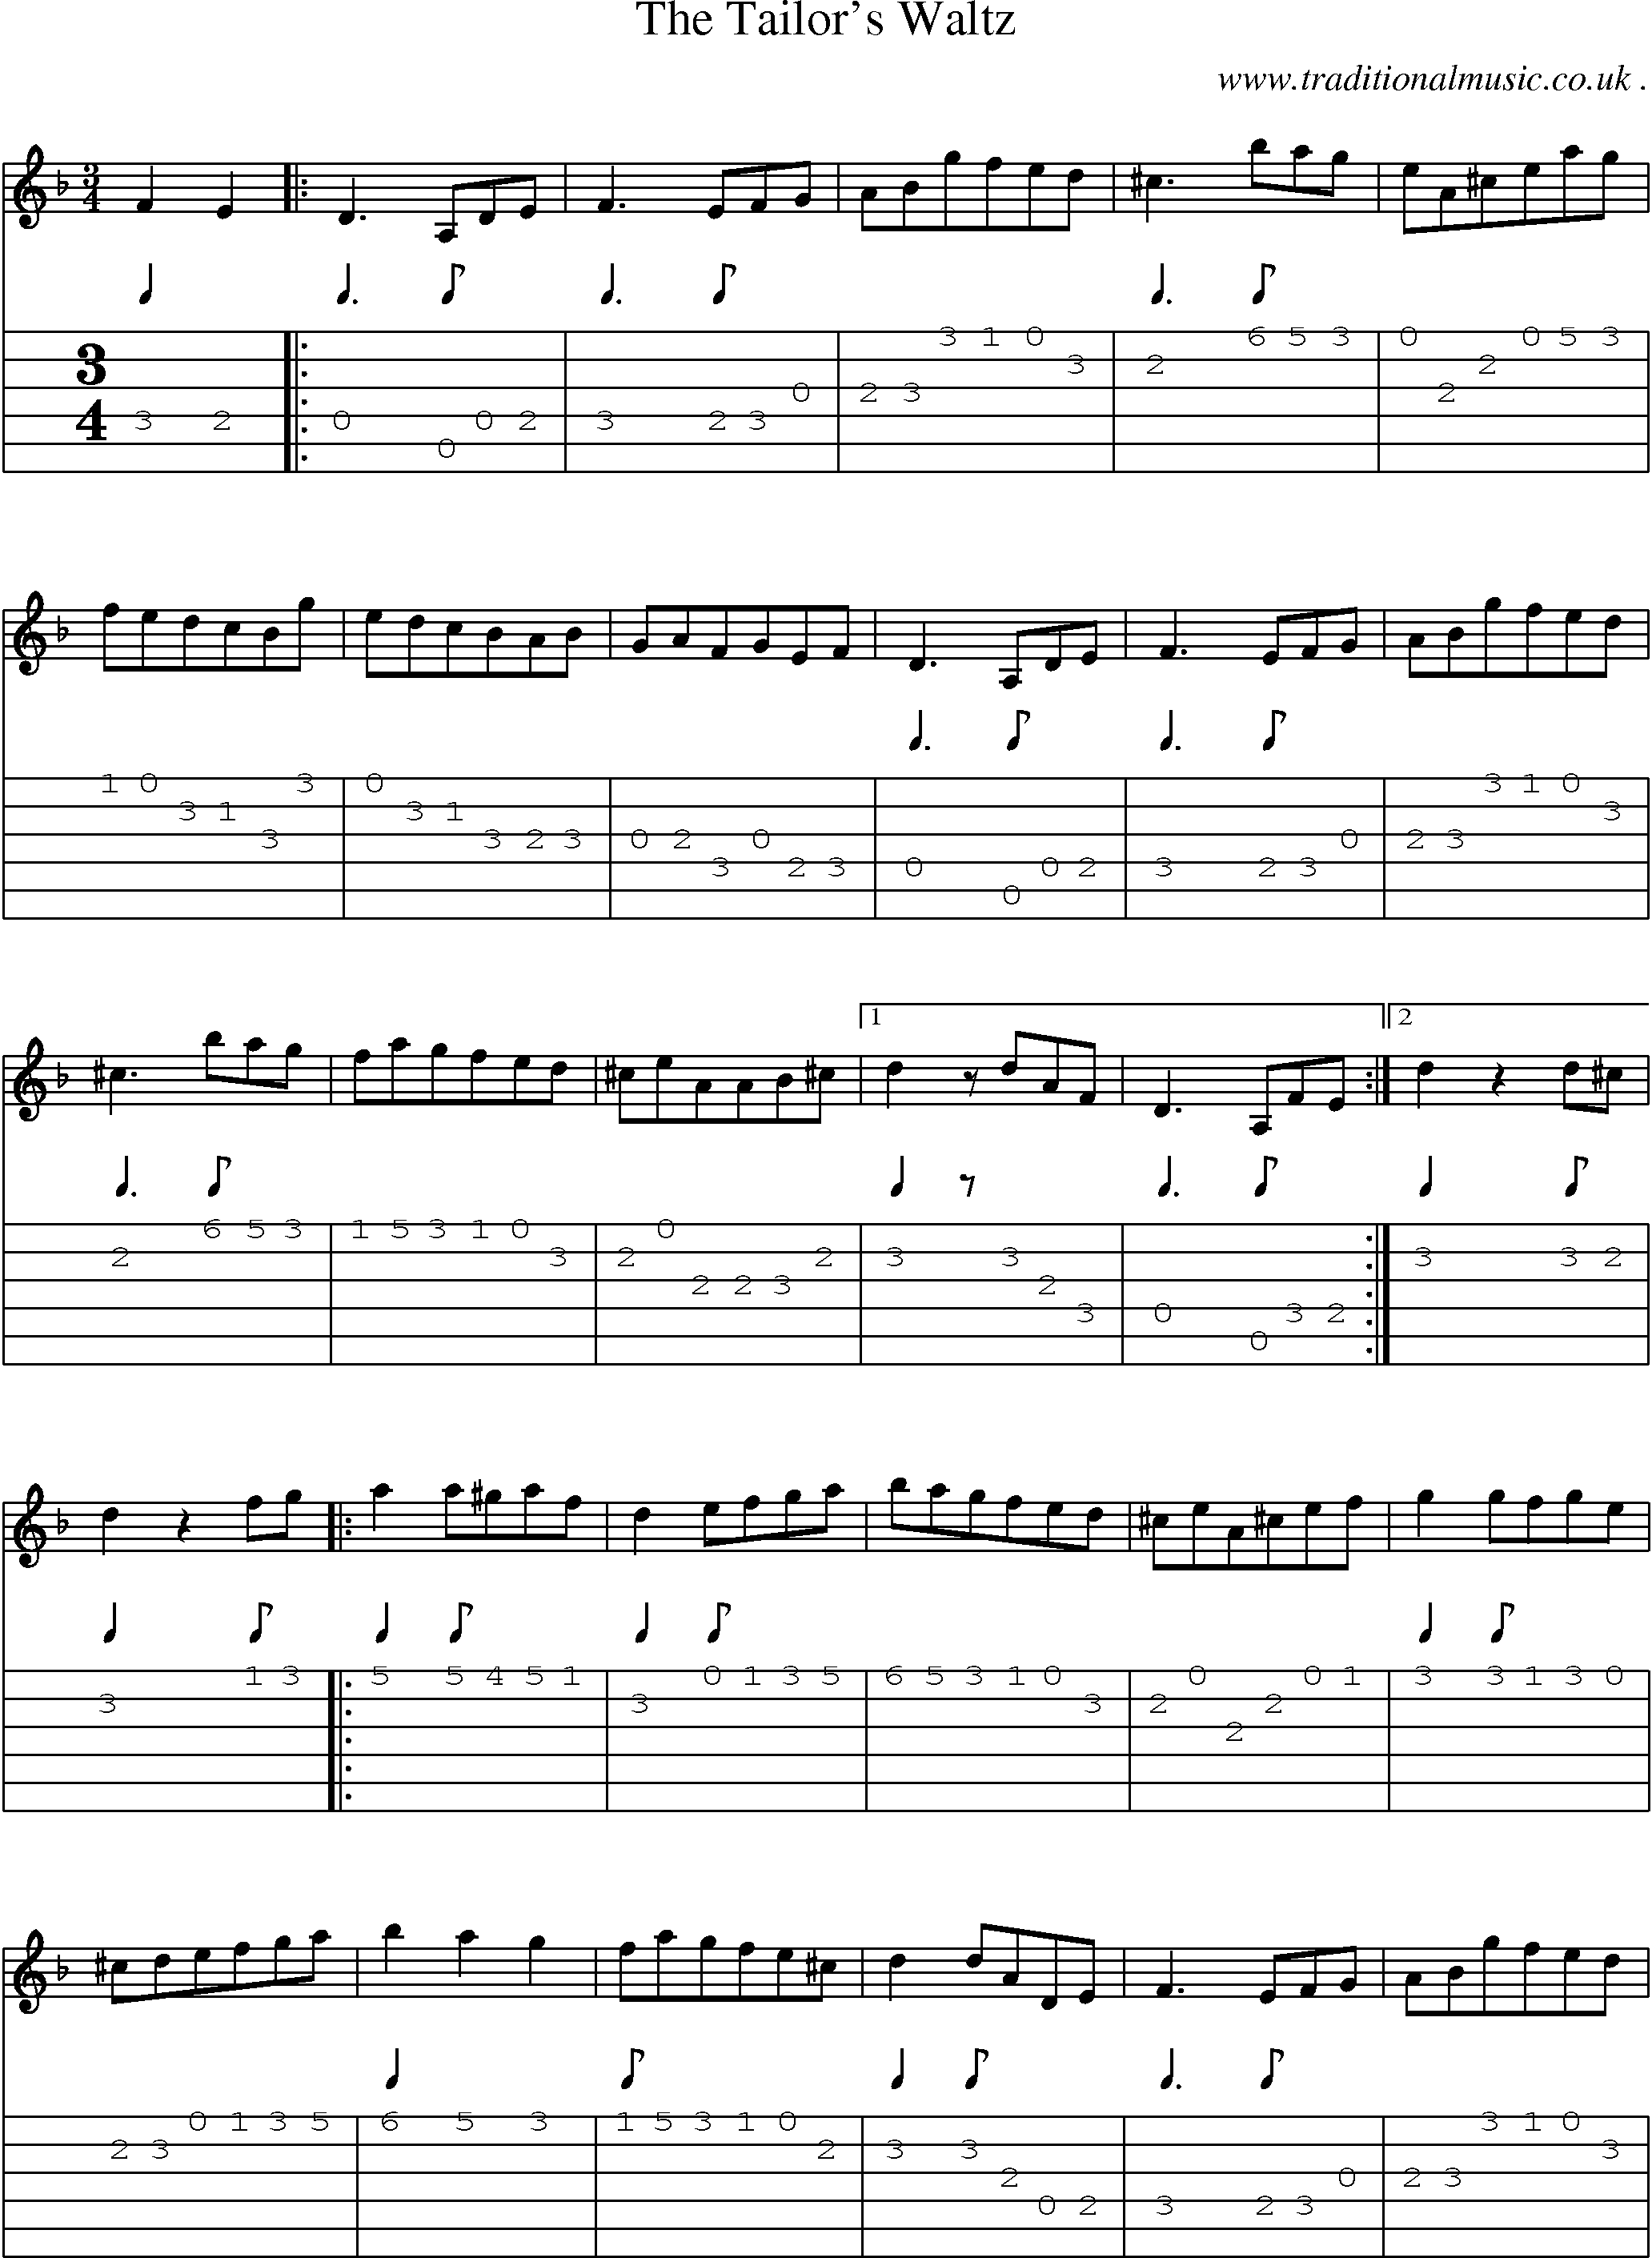 Sheet-Music and Guitar Tabs for The Tailors Waltz